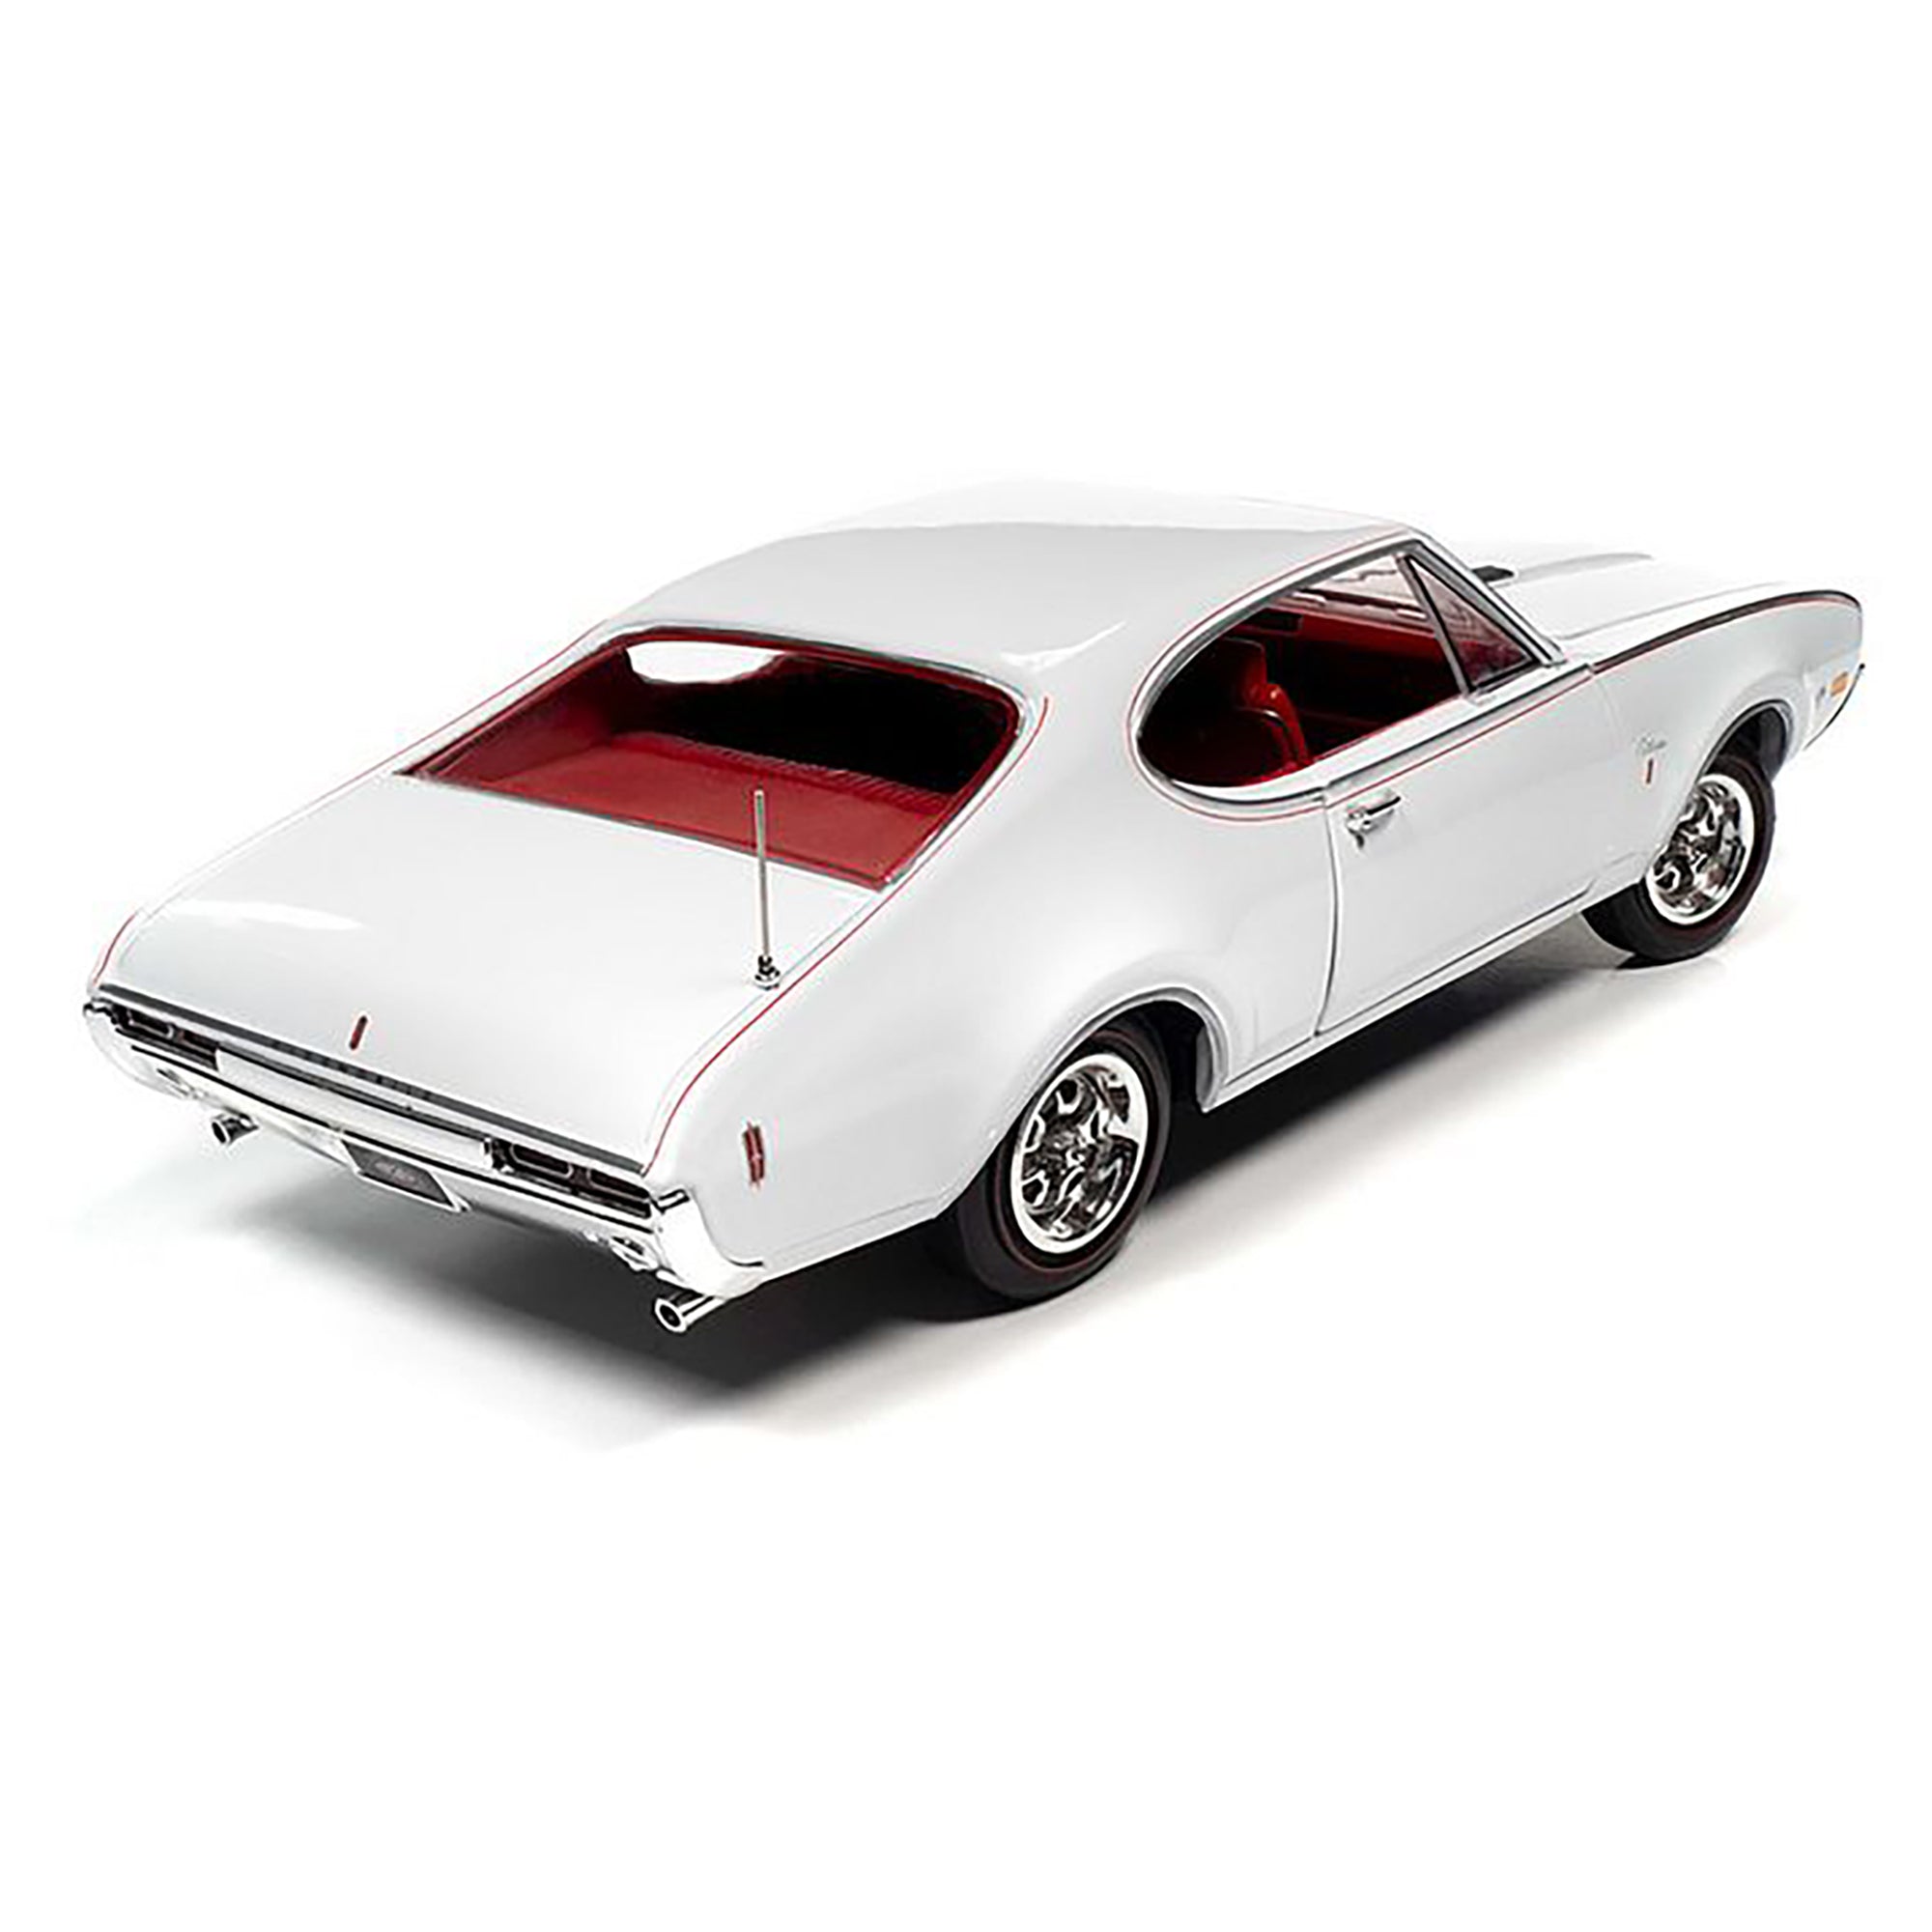 American Dioramas 1968 Oldsmobile Cutlass S W31 Hardtop Muscle Car and Corvette Nationals (MCACN) 1:18 Diecast Vehicle